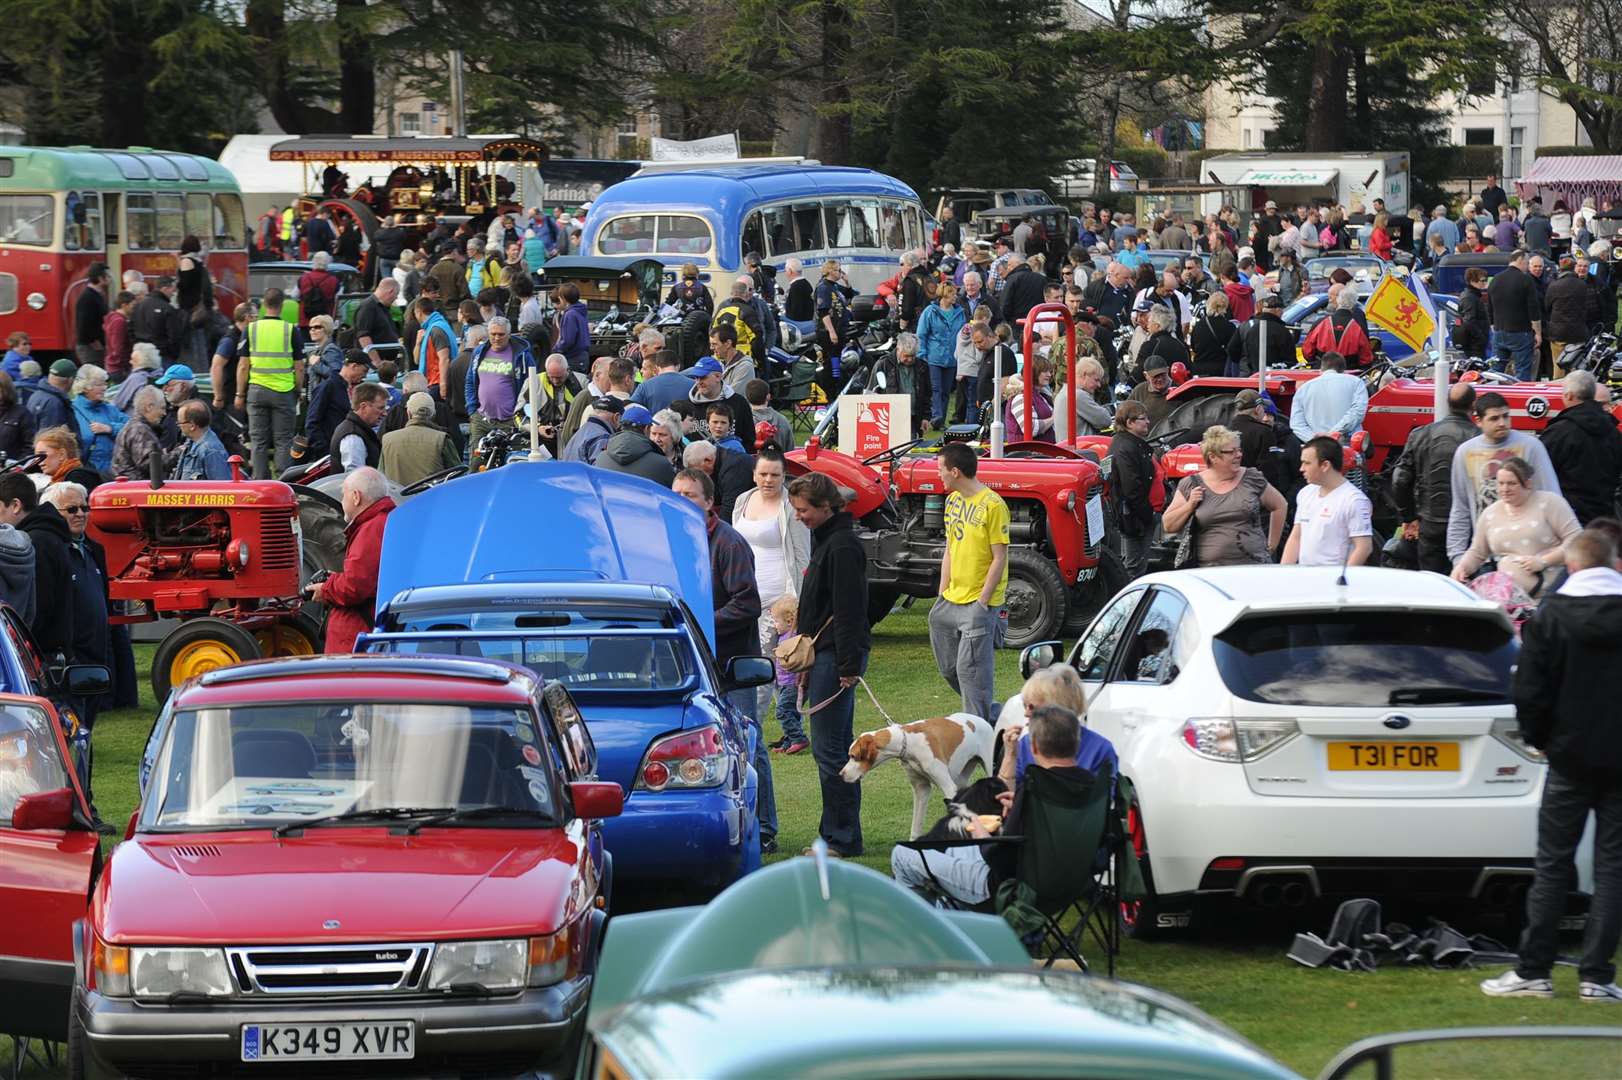 Large crowds in Grant Park during Forres Theme Day in 2013.